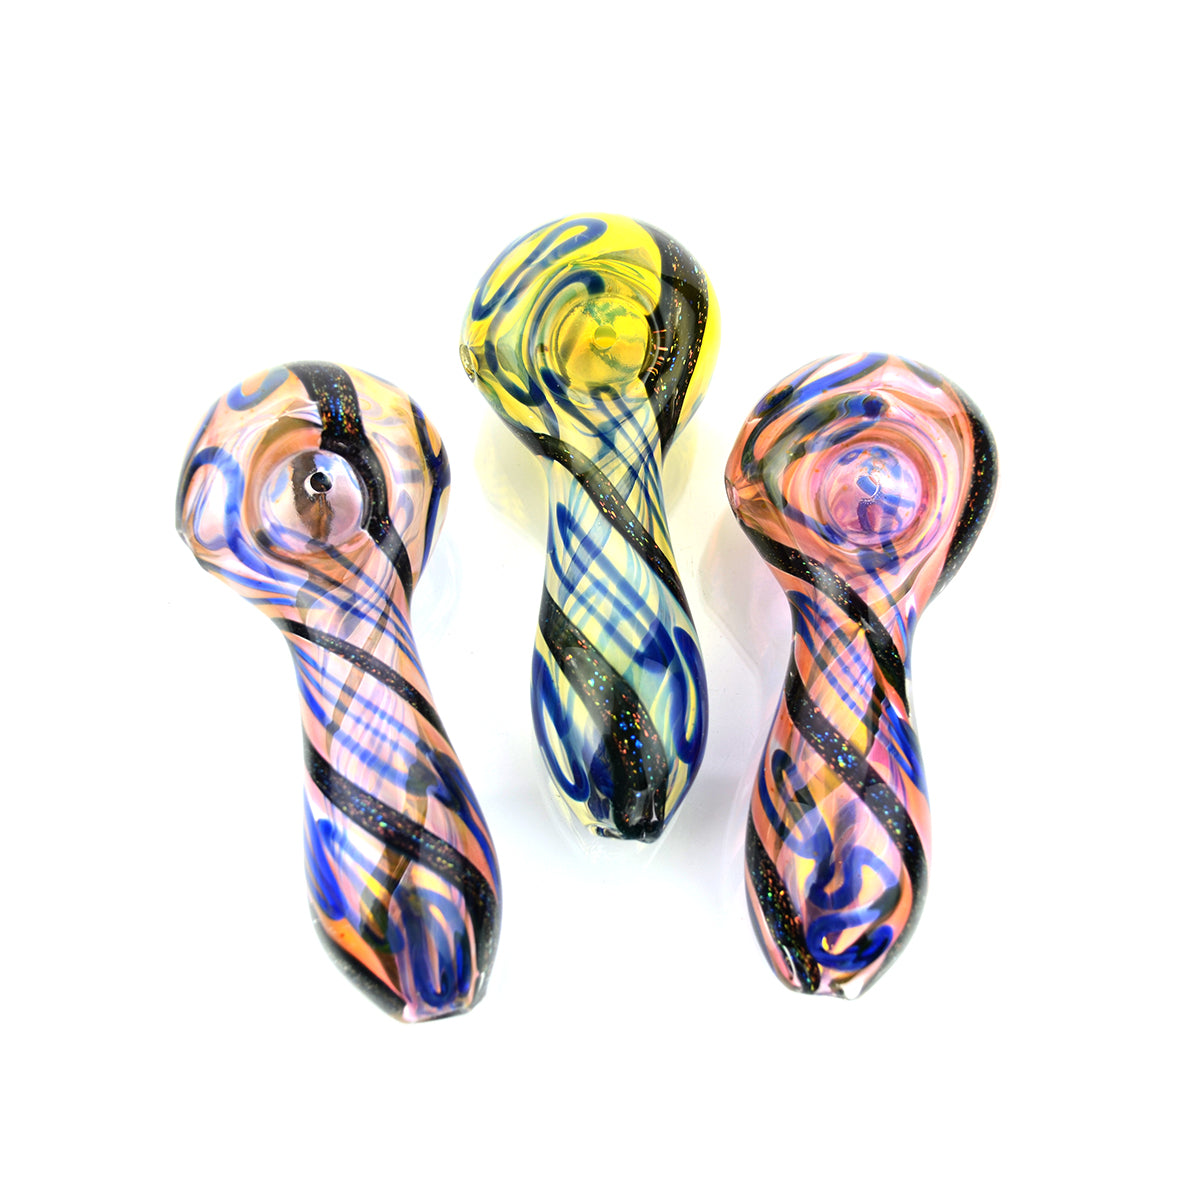 5" American Made Swirling Dichro Art Hand Pipe Spoon Gold Fume Glass - LA Wholesale Kings